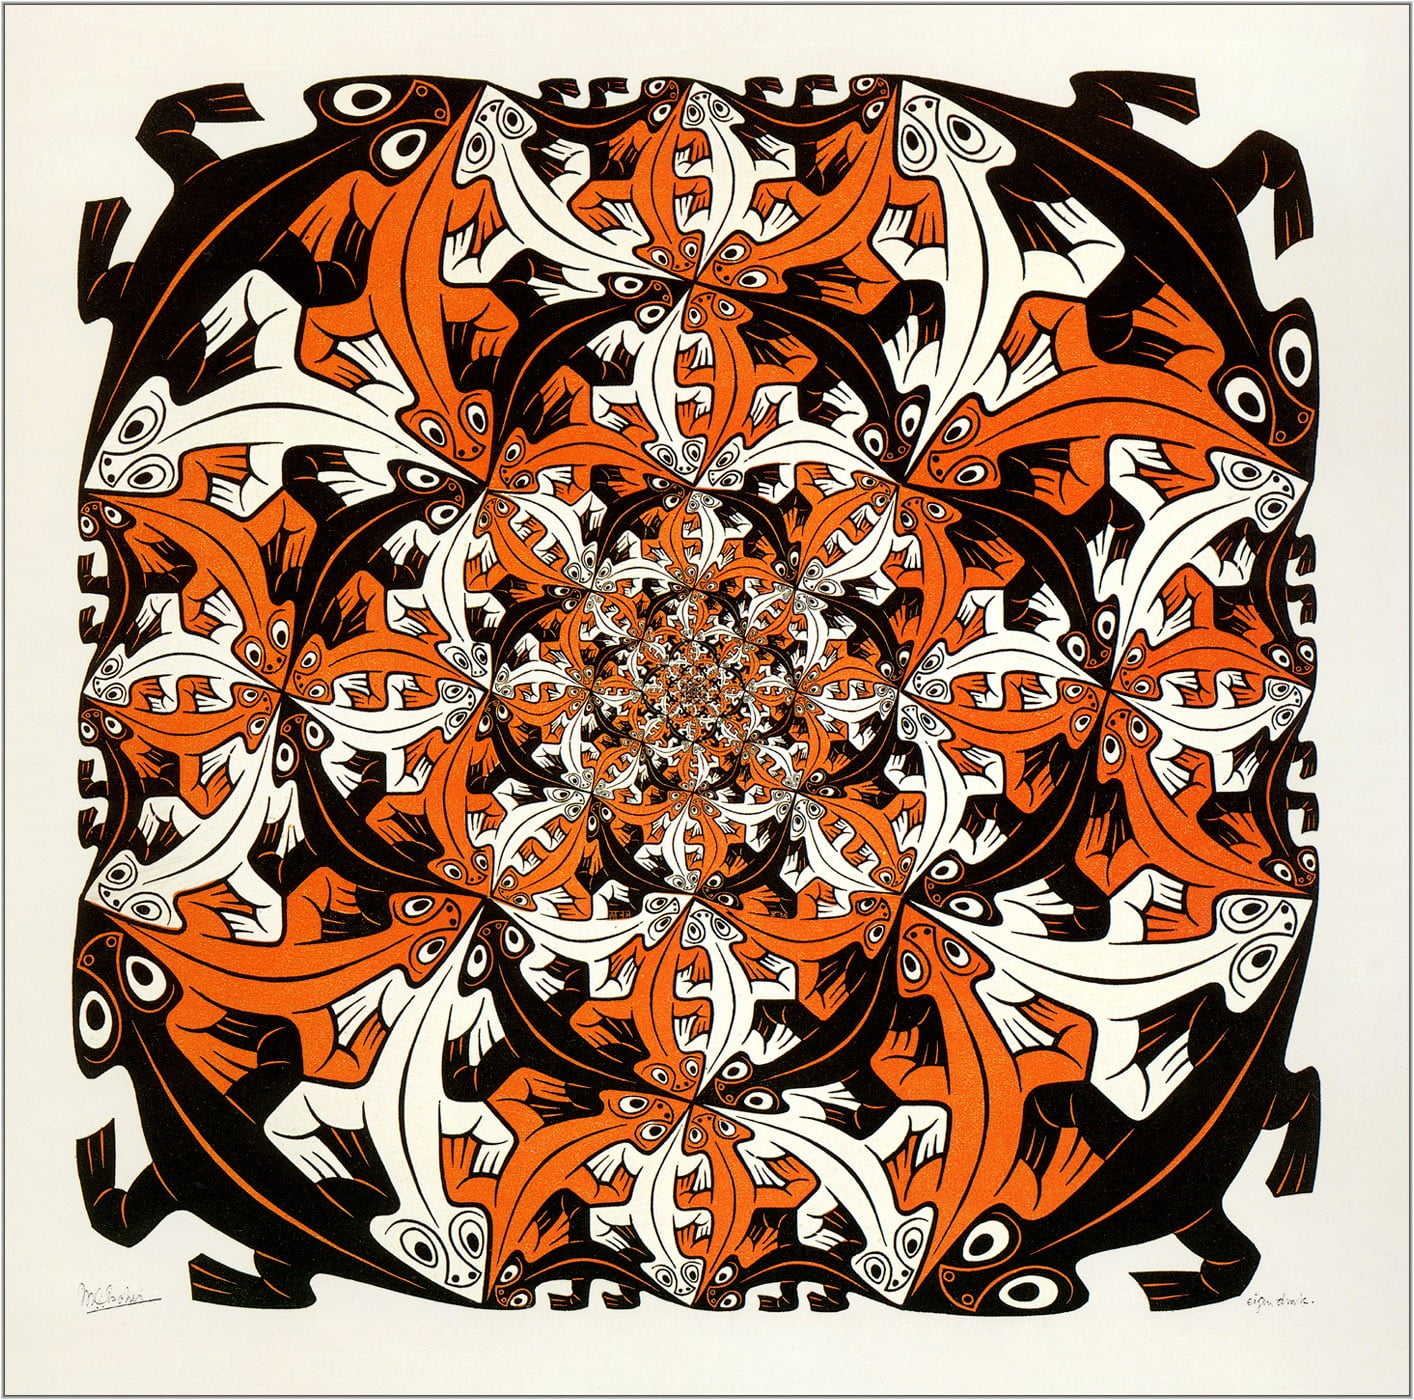 orange, white, and black abstract painting, artwork, drawing, M. C. Escher, symmetry